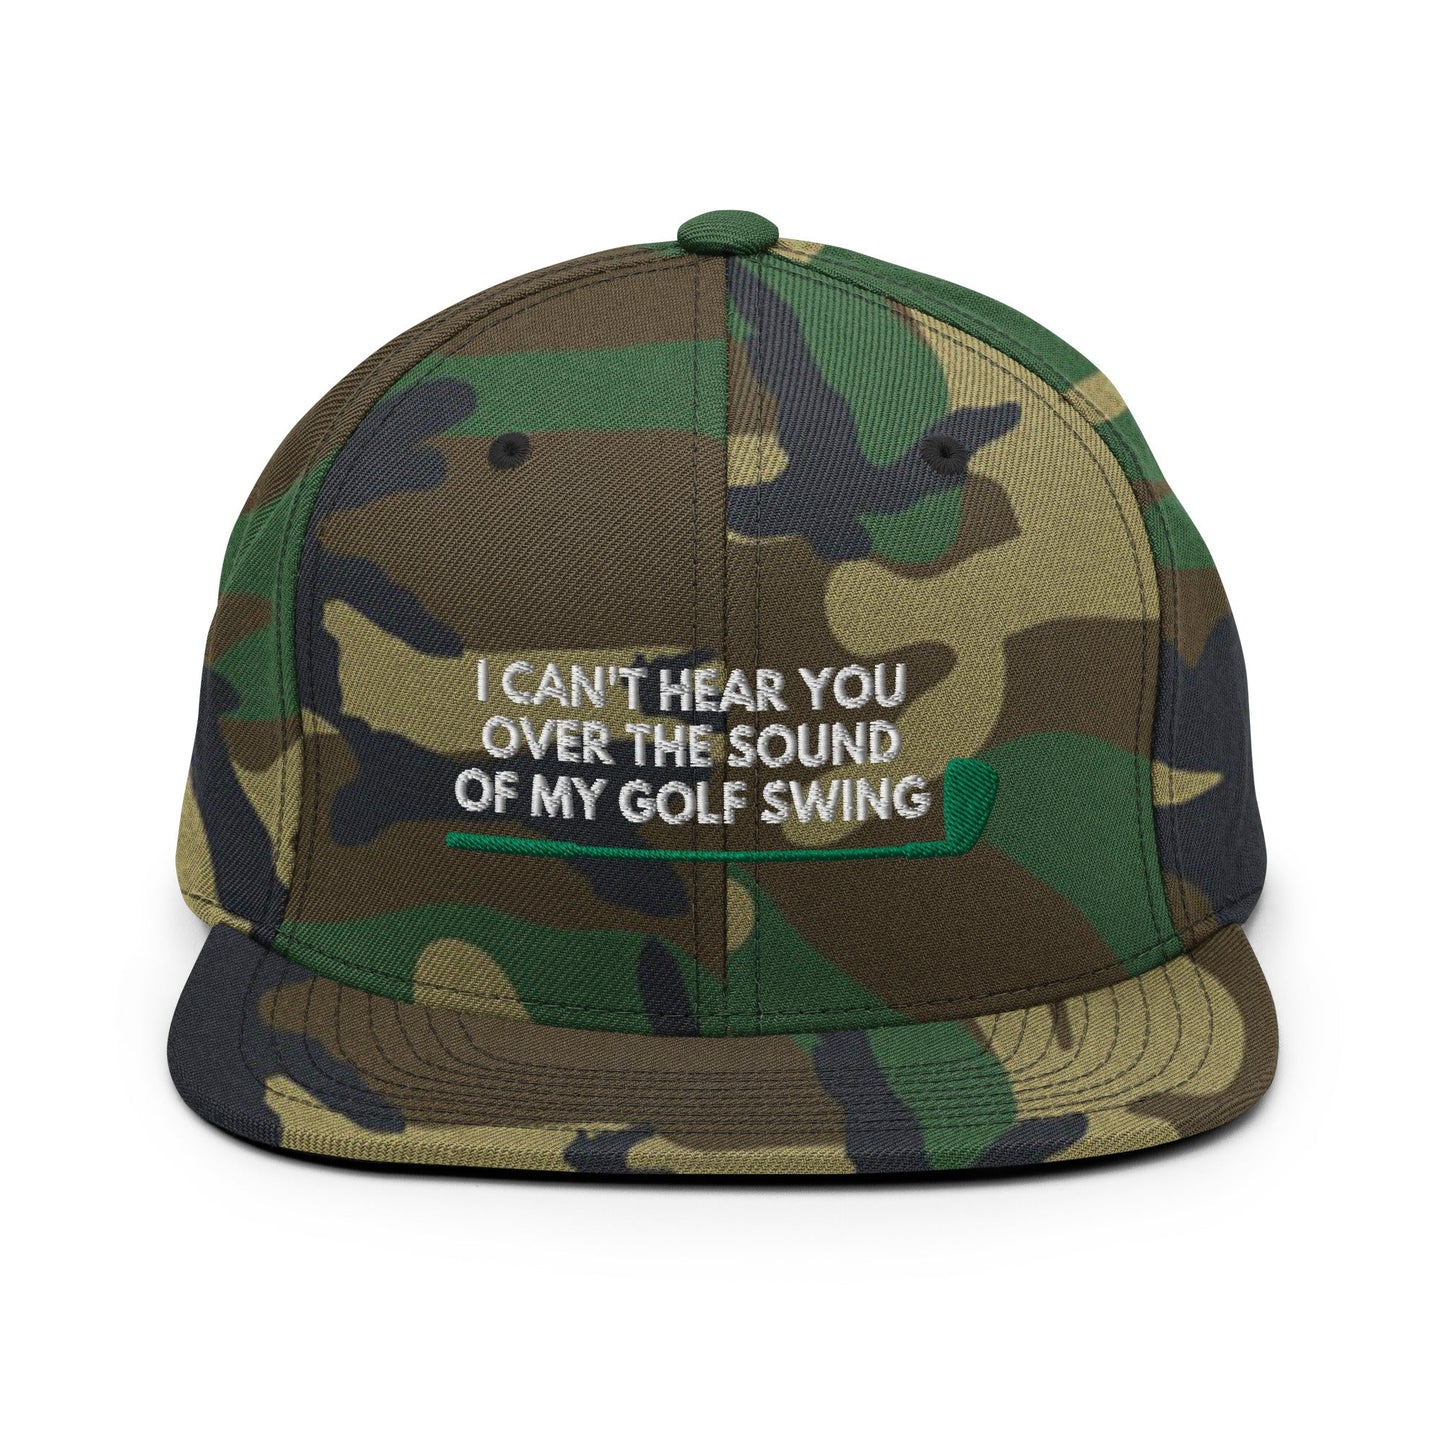 Funny Golfer Gifts  Snapback Hat Green Camo I Cant Hear You Over The Sound Of My Golf Swing Hat Snapback Hat